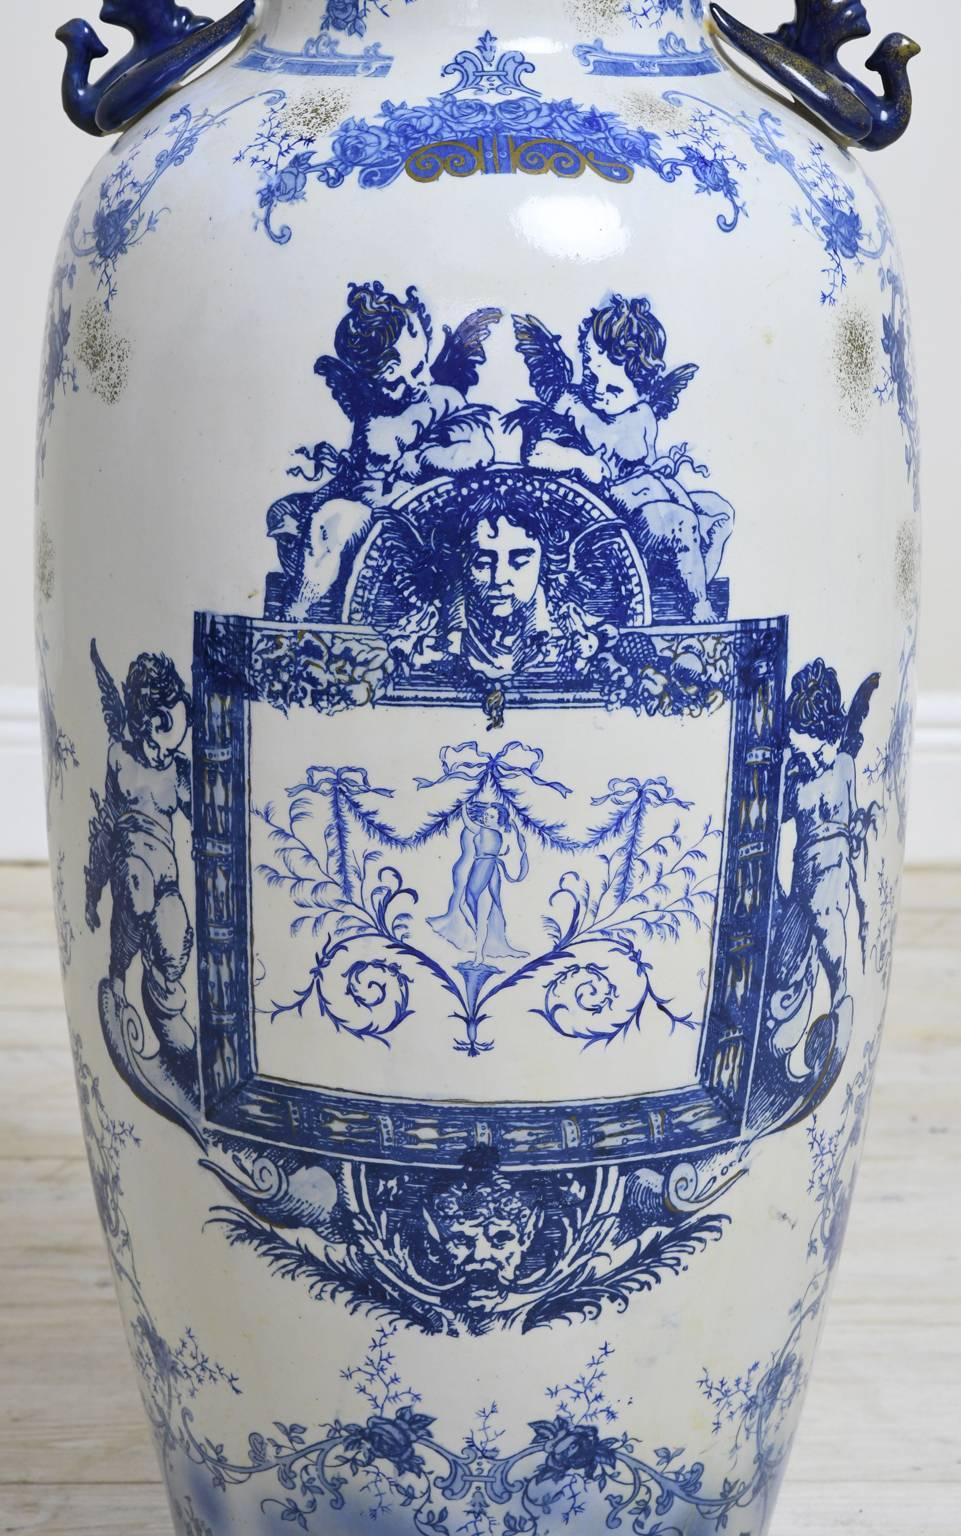 Chinese Export 20th Century Decorative Blue and White Chinese Porcelain Export Urn